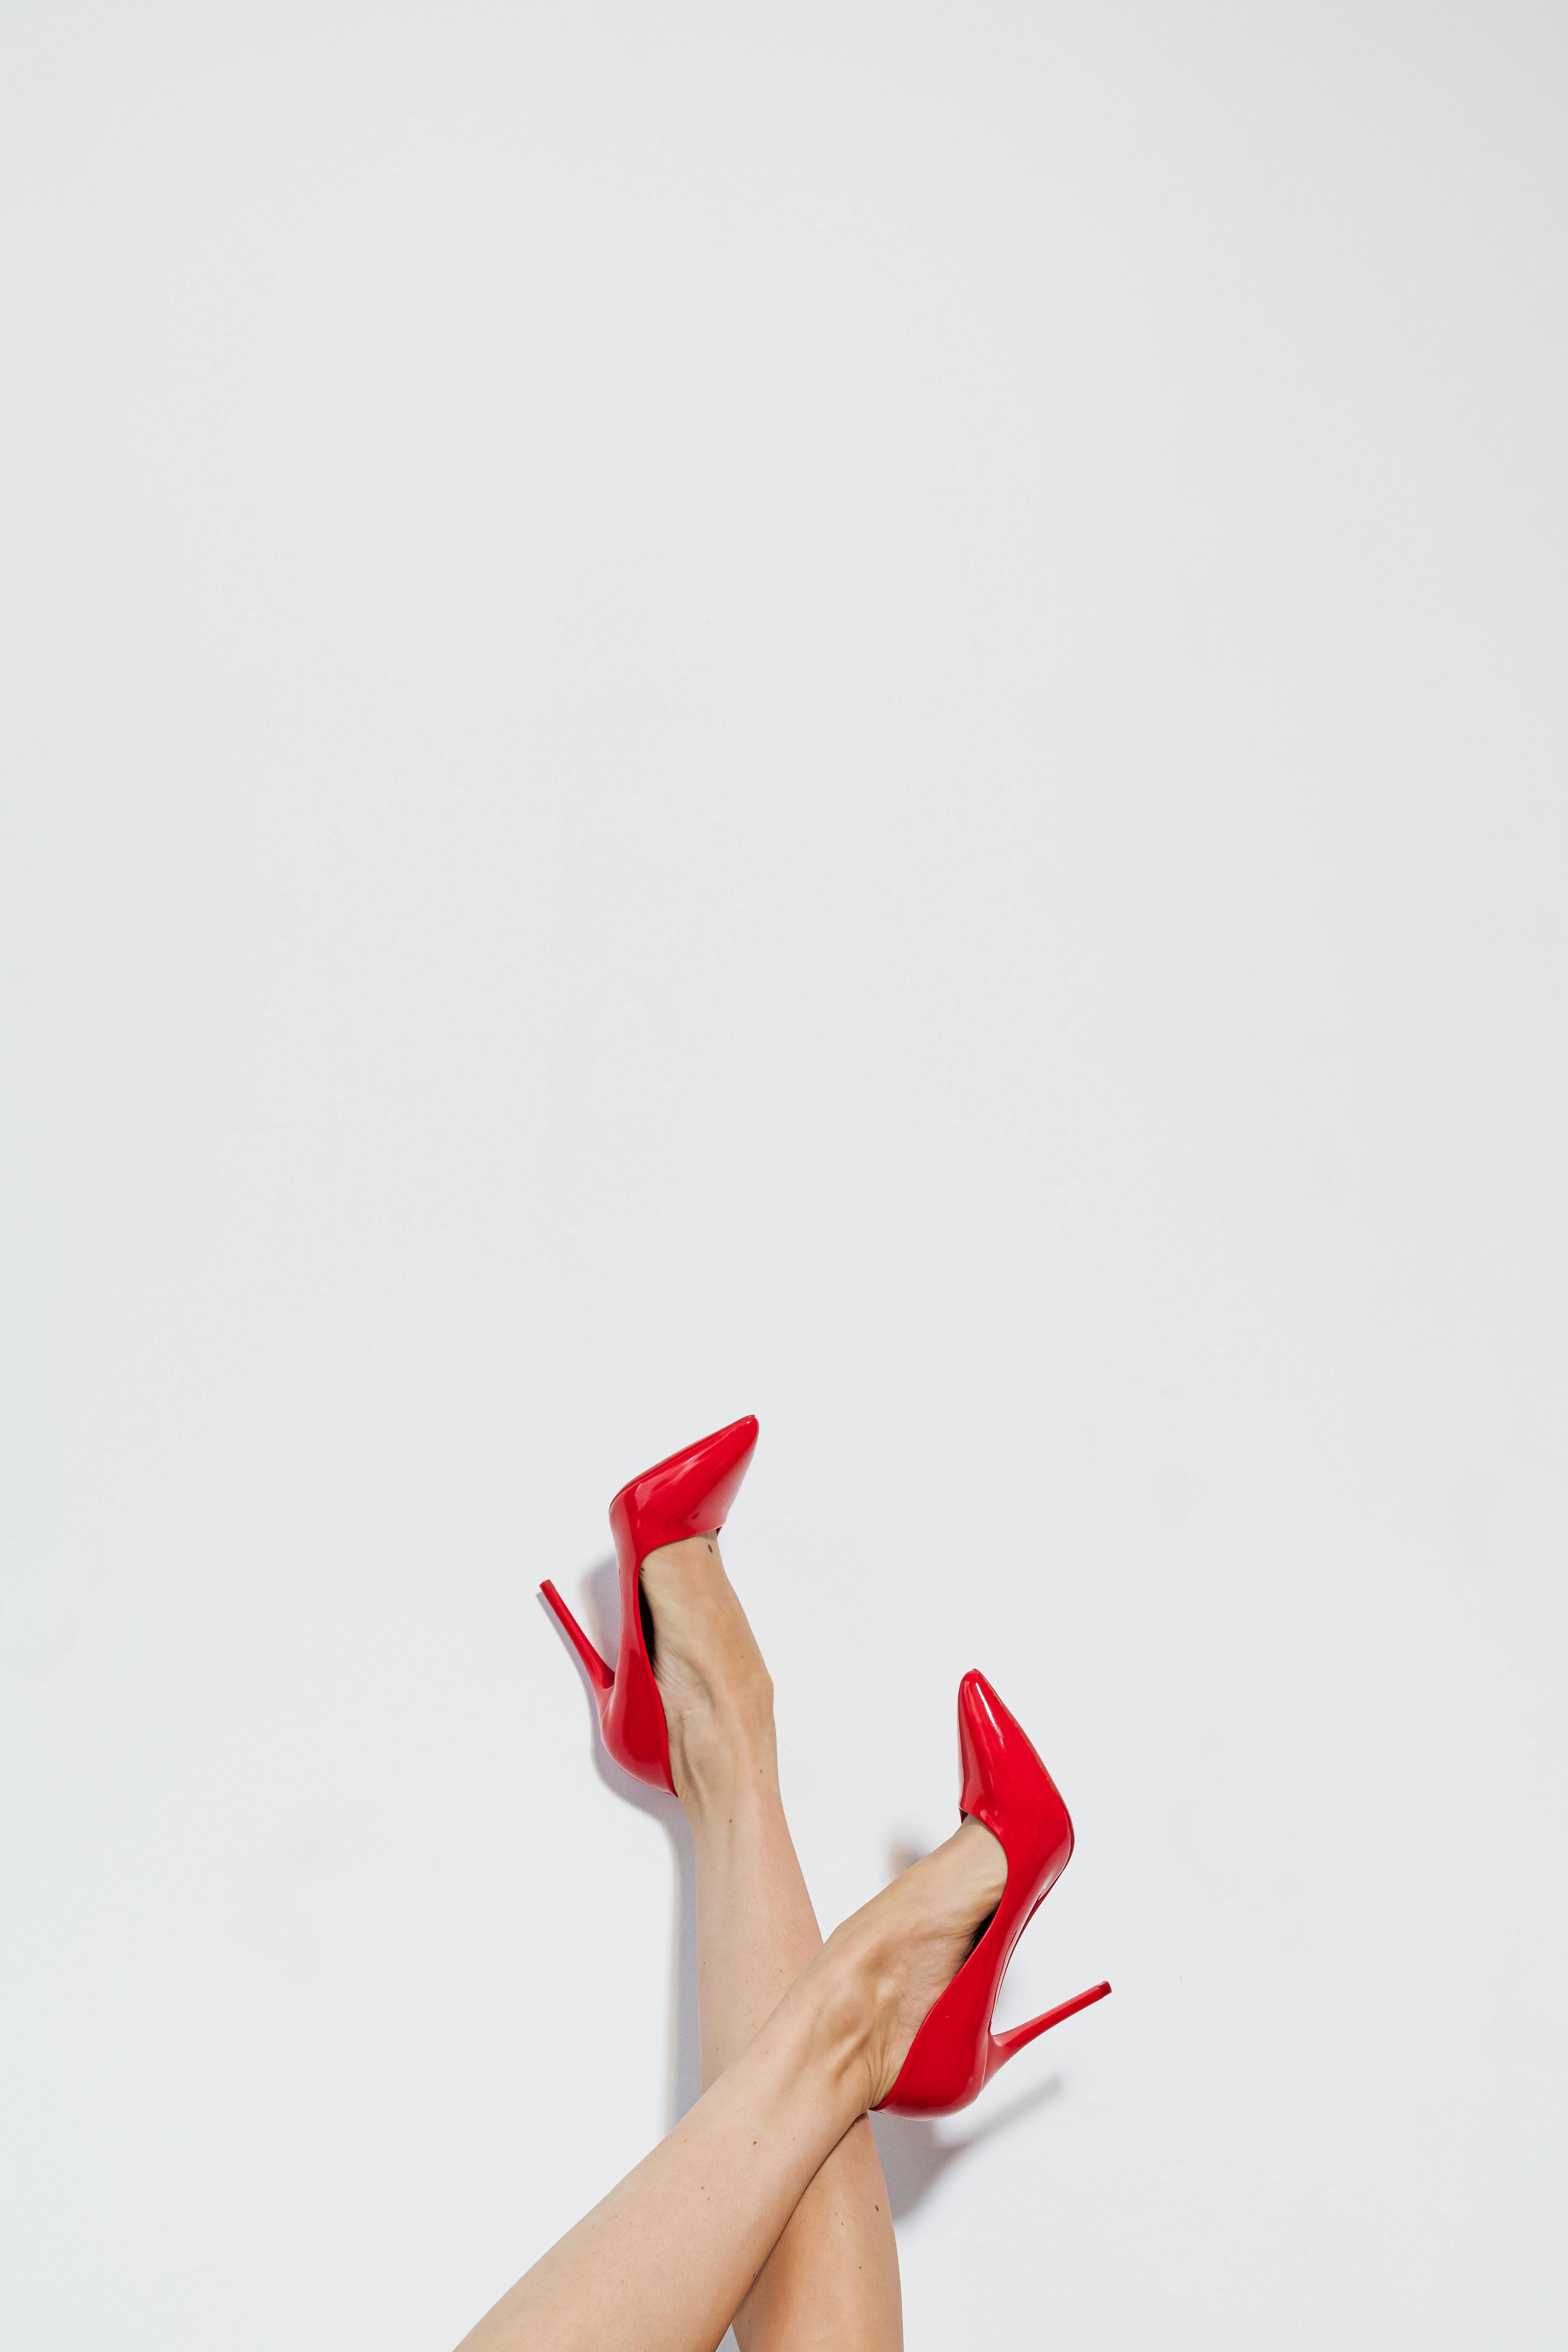 womans feet in high heeled red shoes